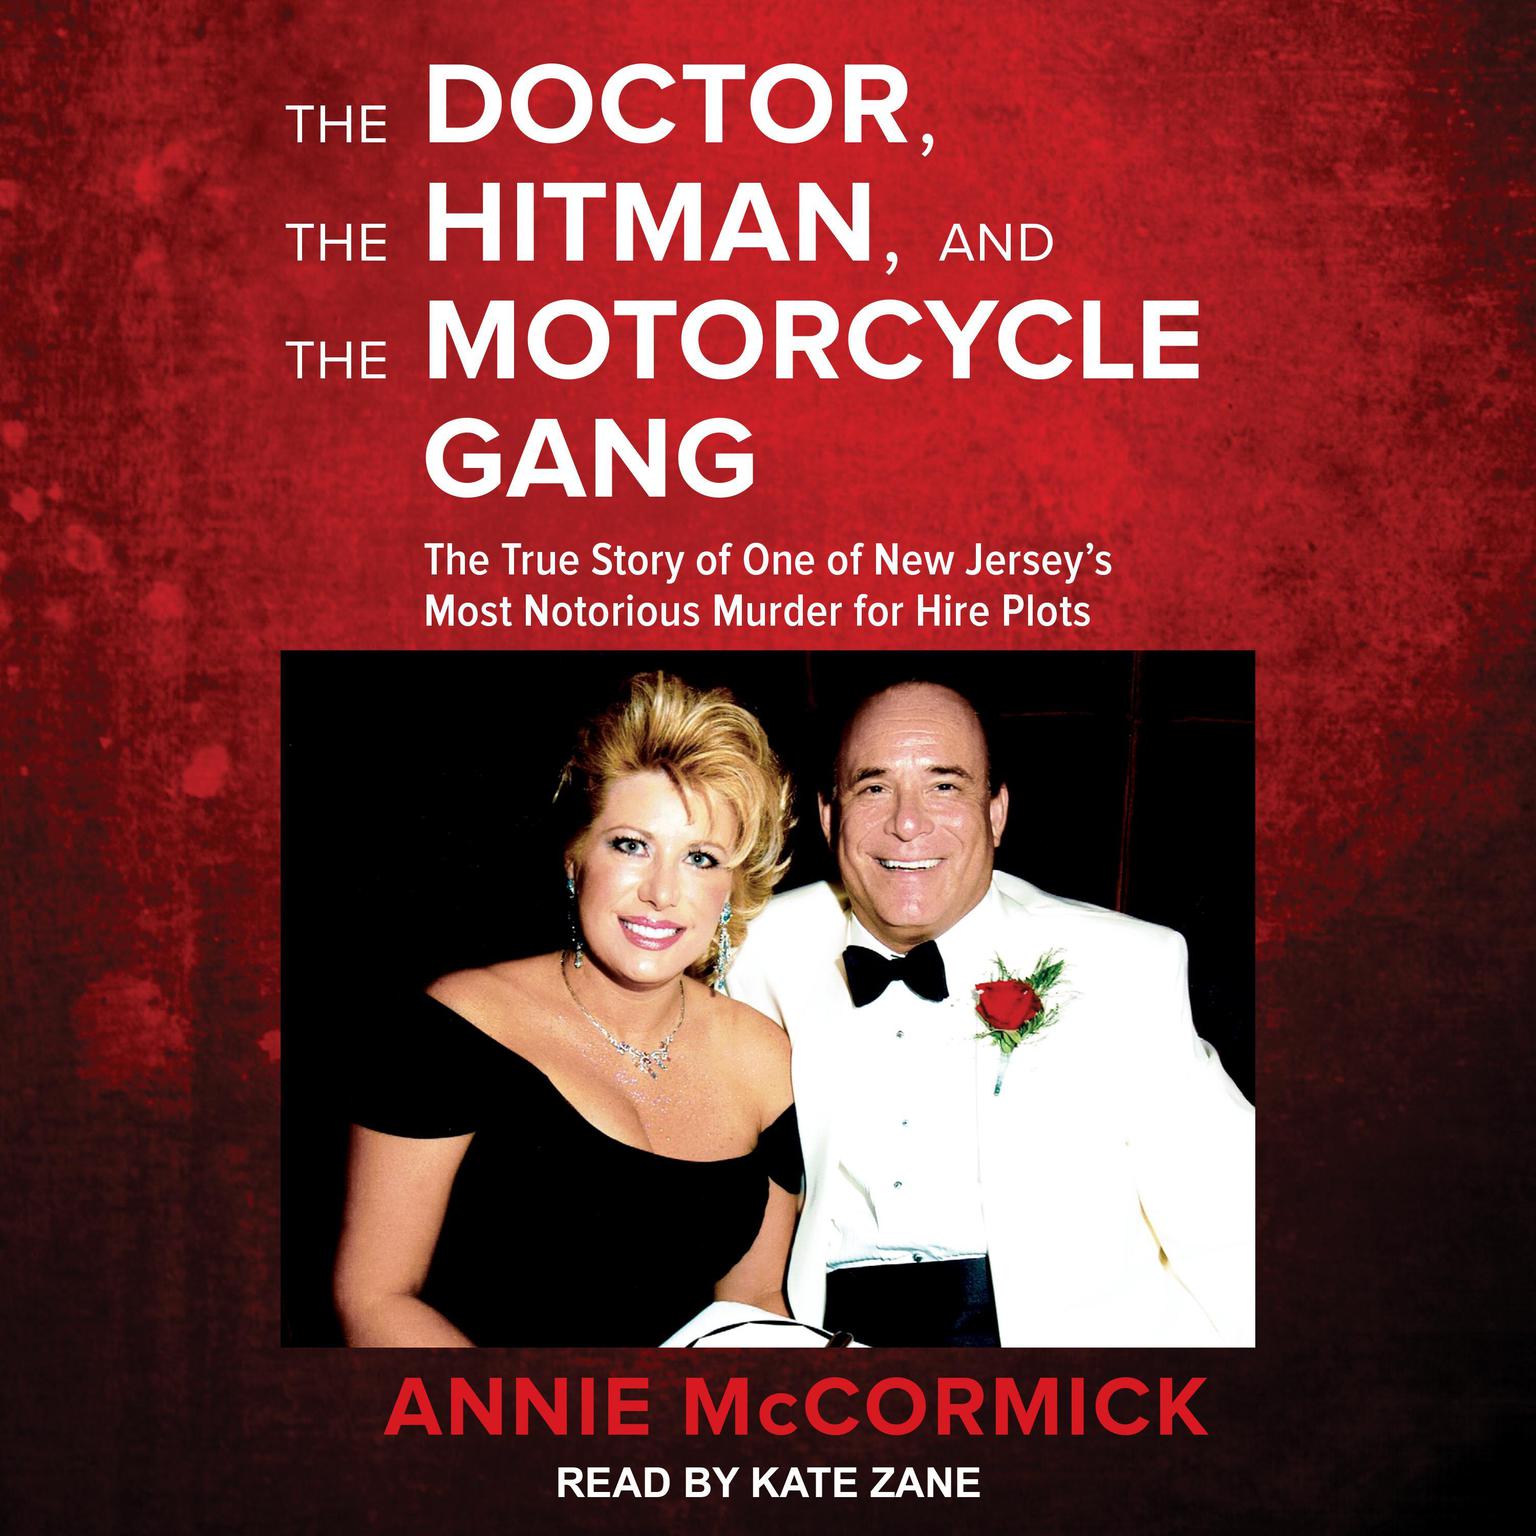 The Doctor, the Hitman, and the Motorcycle Gang: The True Story of One of New Jersey’s Most Notorious Murder for Hire Plots Audiobook, by Annie McCormick